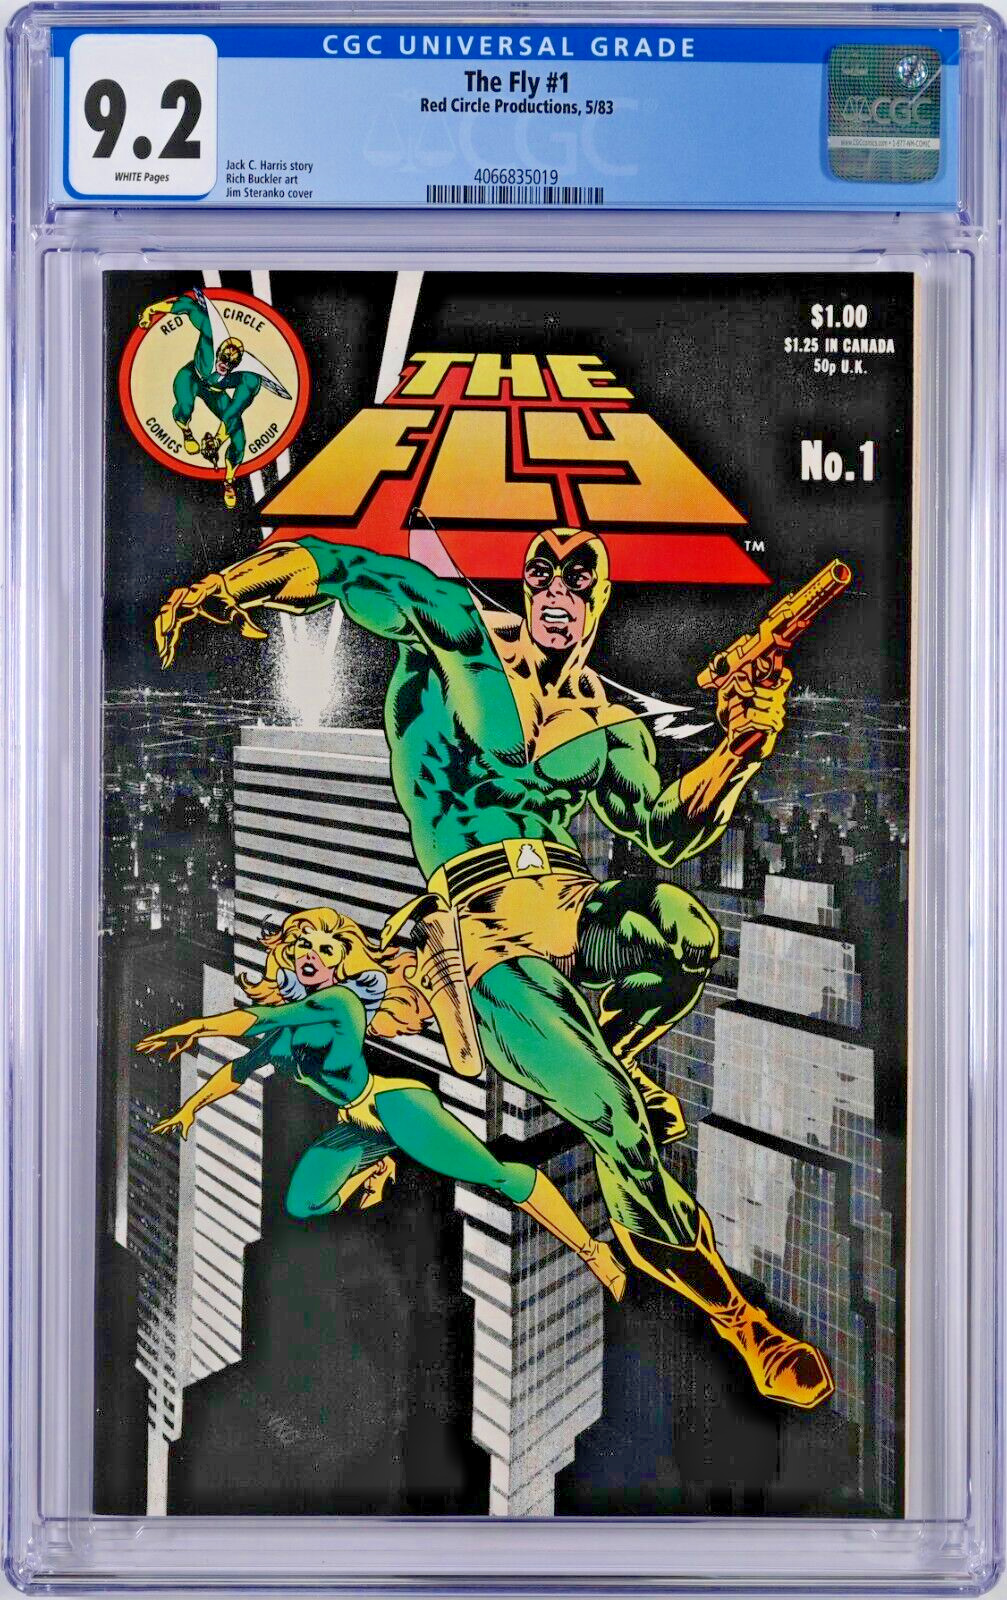 The Fly #1 CGC 9.2 (May 1983, Red Circle) Rich Buckler Art, Jim Steranko Cover